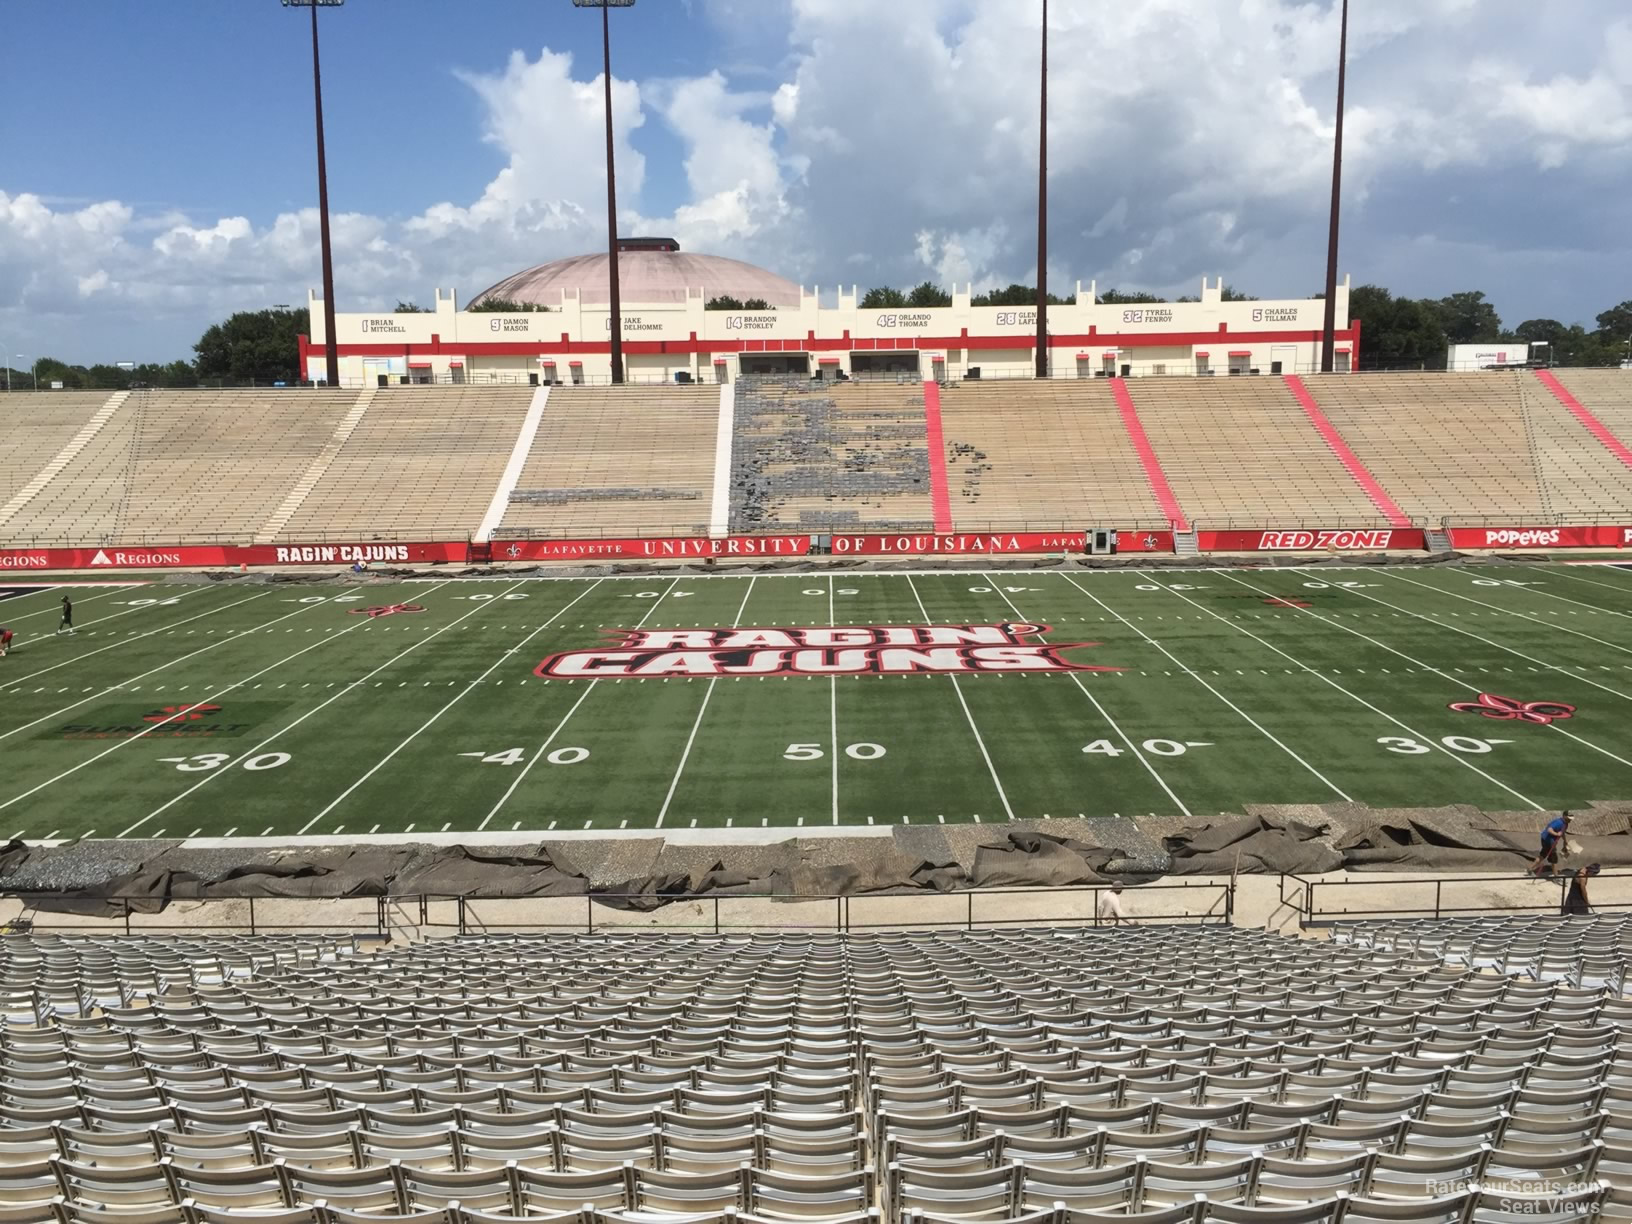 section d2, row 30 seat view  - cajun field